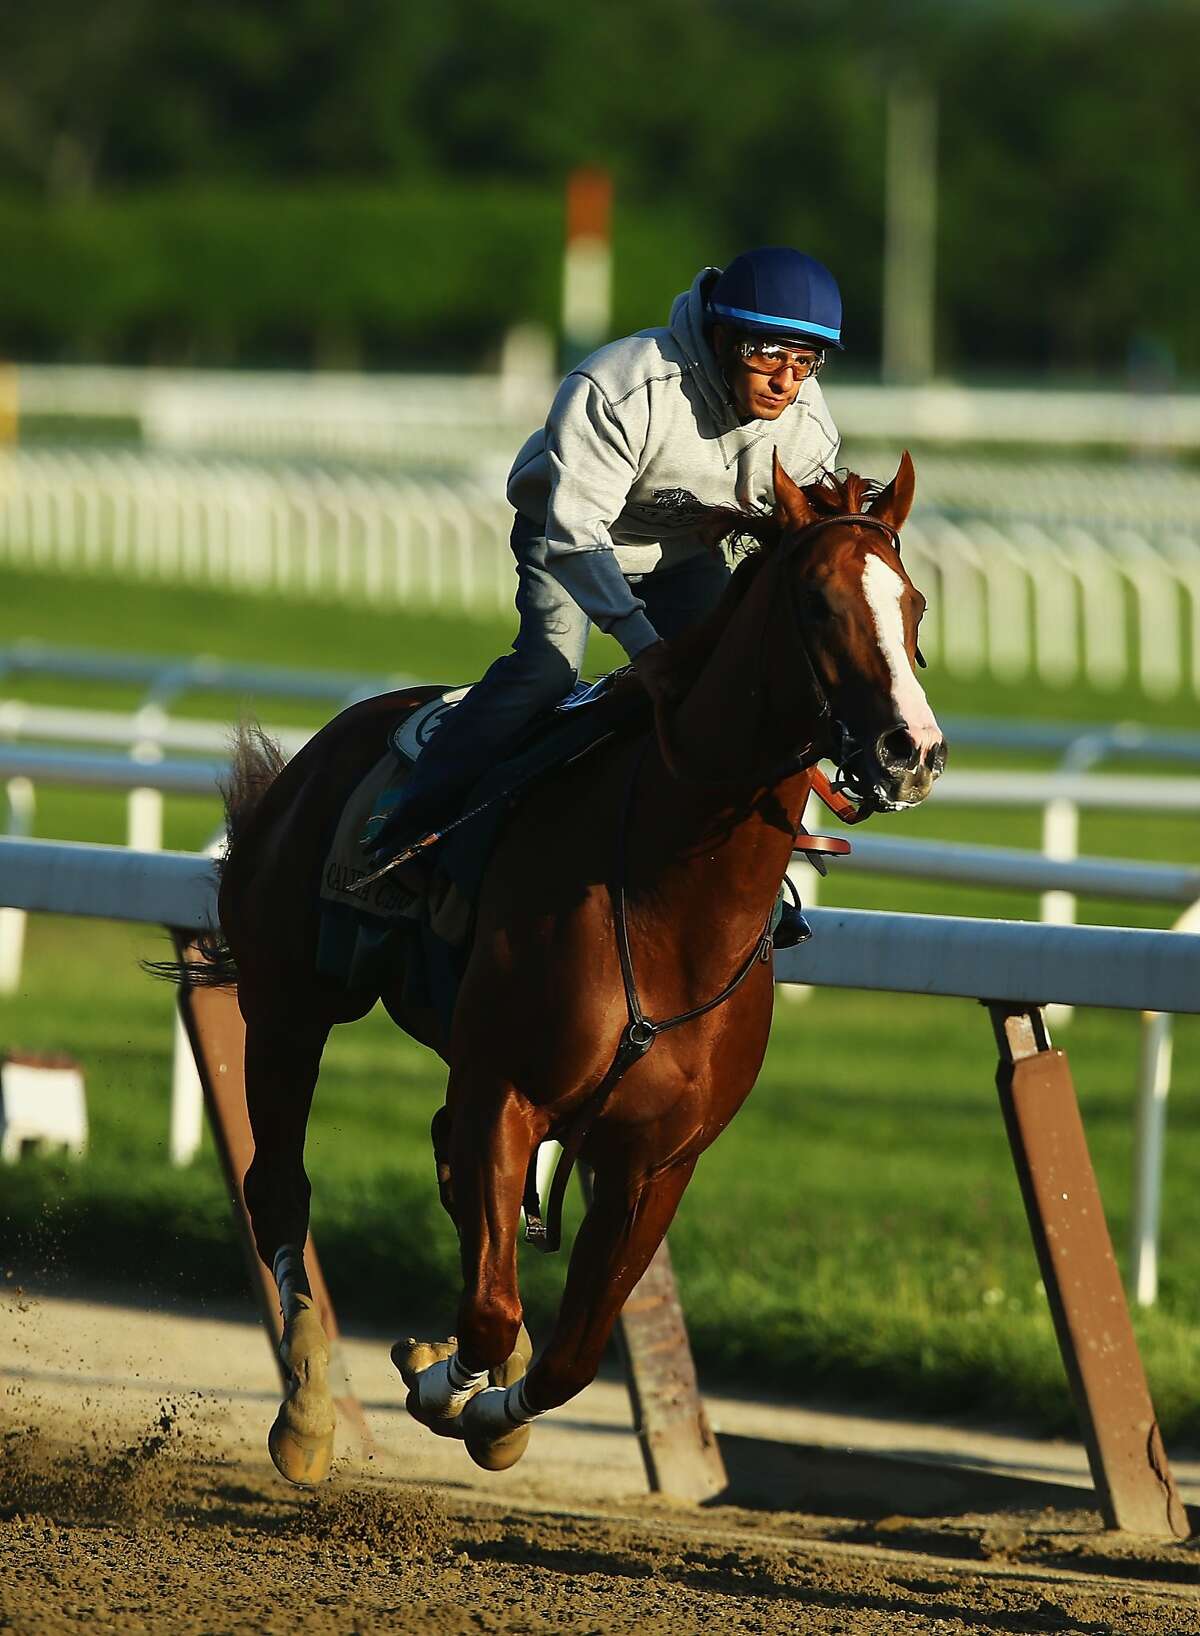 ELMONT, NY - MAY 31: Kentucky Derby and Preakness winner California Chrome with Jockey Victor Espinoza up trains at Belmont Park on May 31, 2014 in Elmont, New York. He is scheduled to race for the Triple Crown in the 146th running of the Belmont Stakes (Photo by Al Bello/Getty Images)